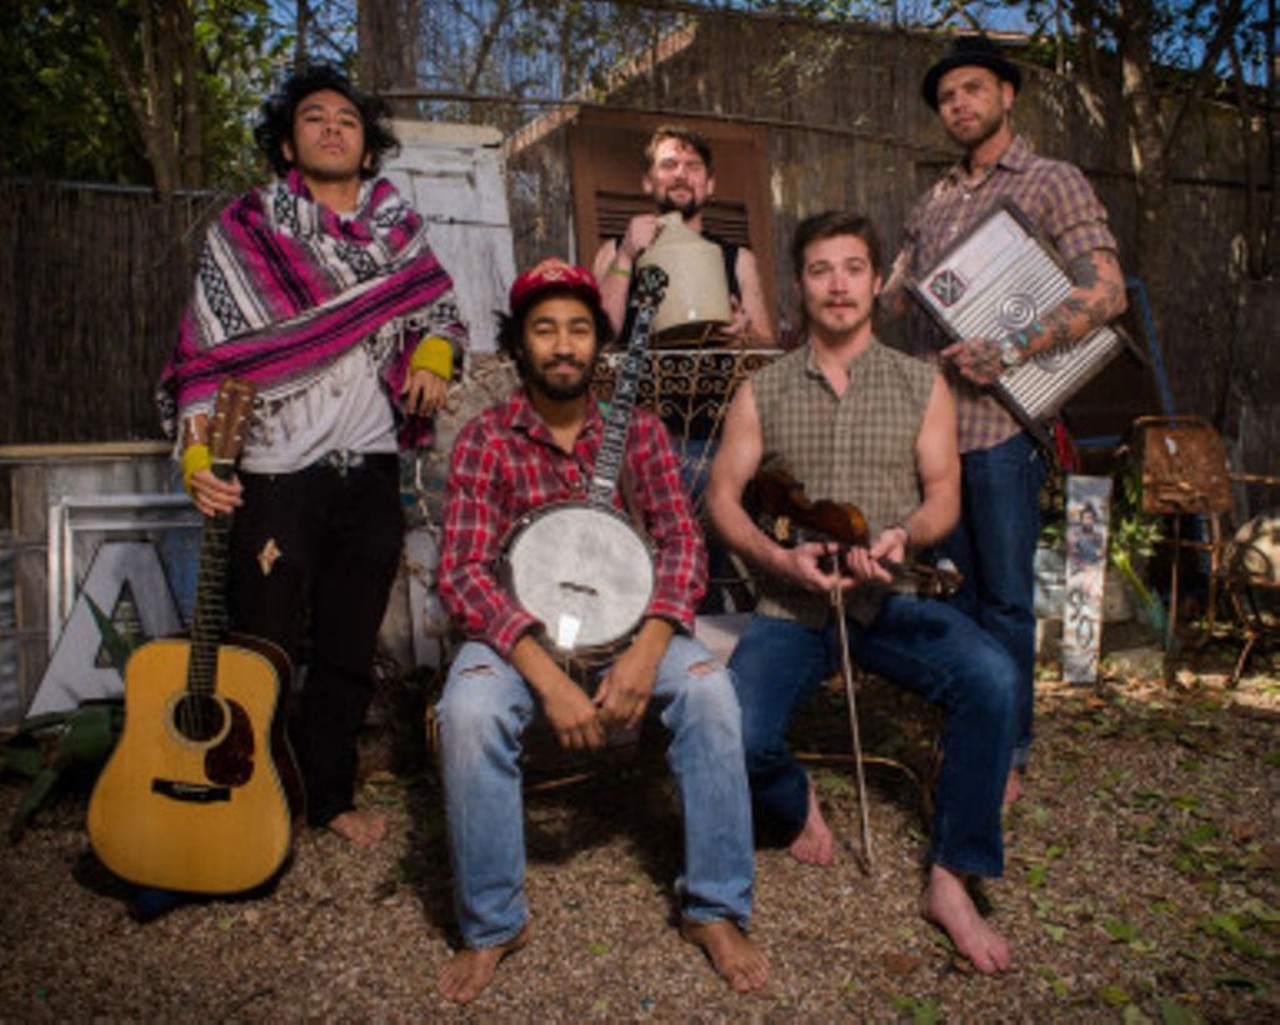 Whiskey Shivers 
Wed., July 19, 8 p.m., Paper Tiger, $10.